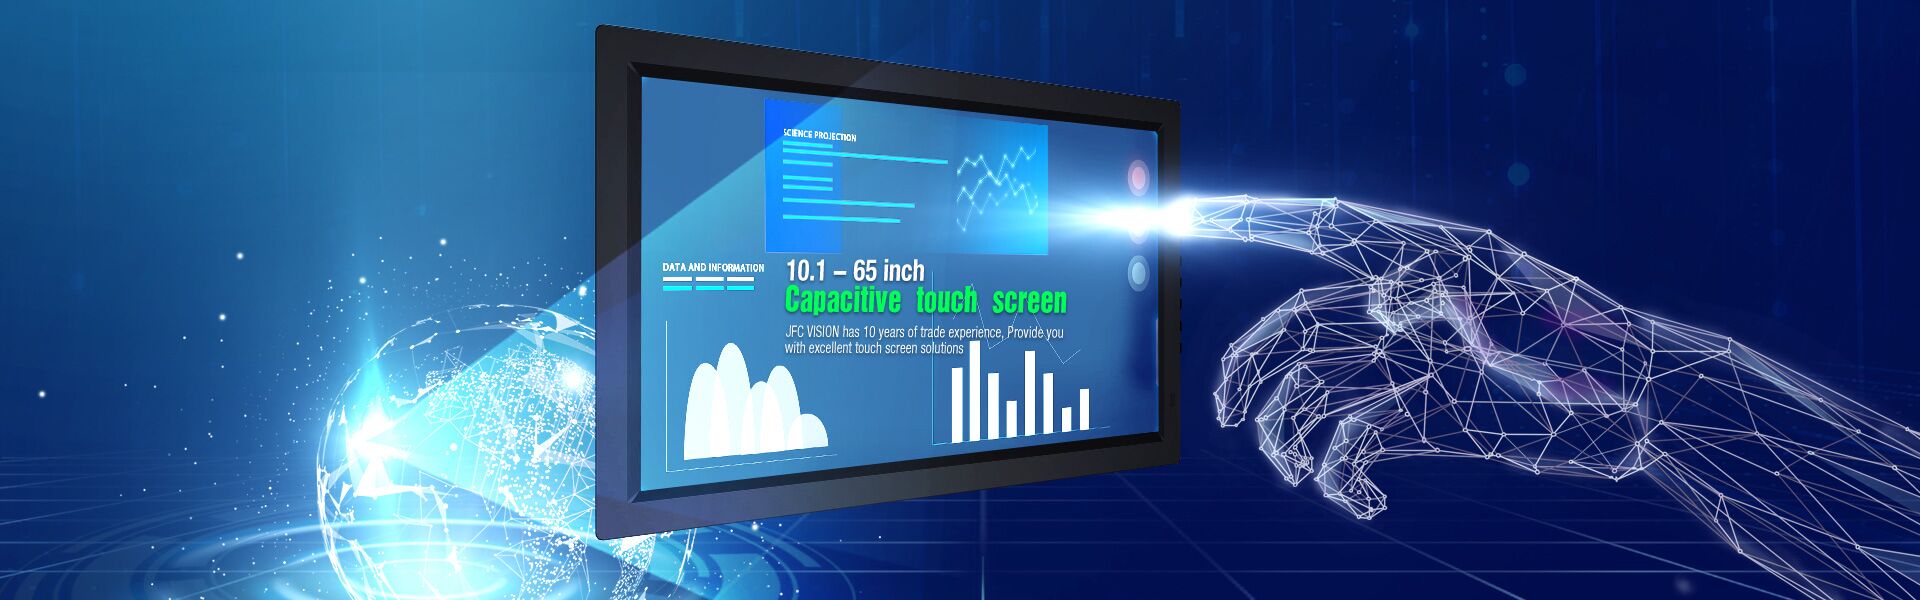 Projected Capacitive Touch Screen